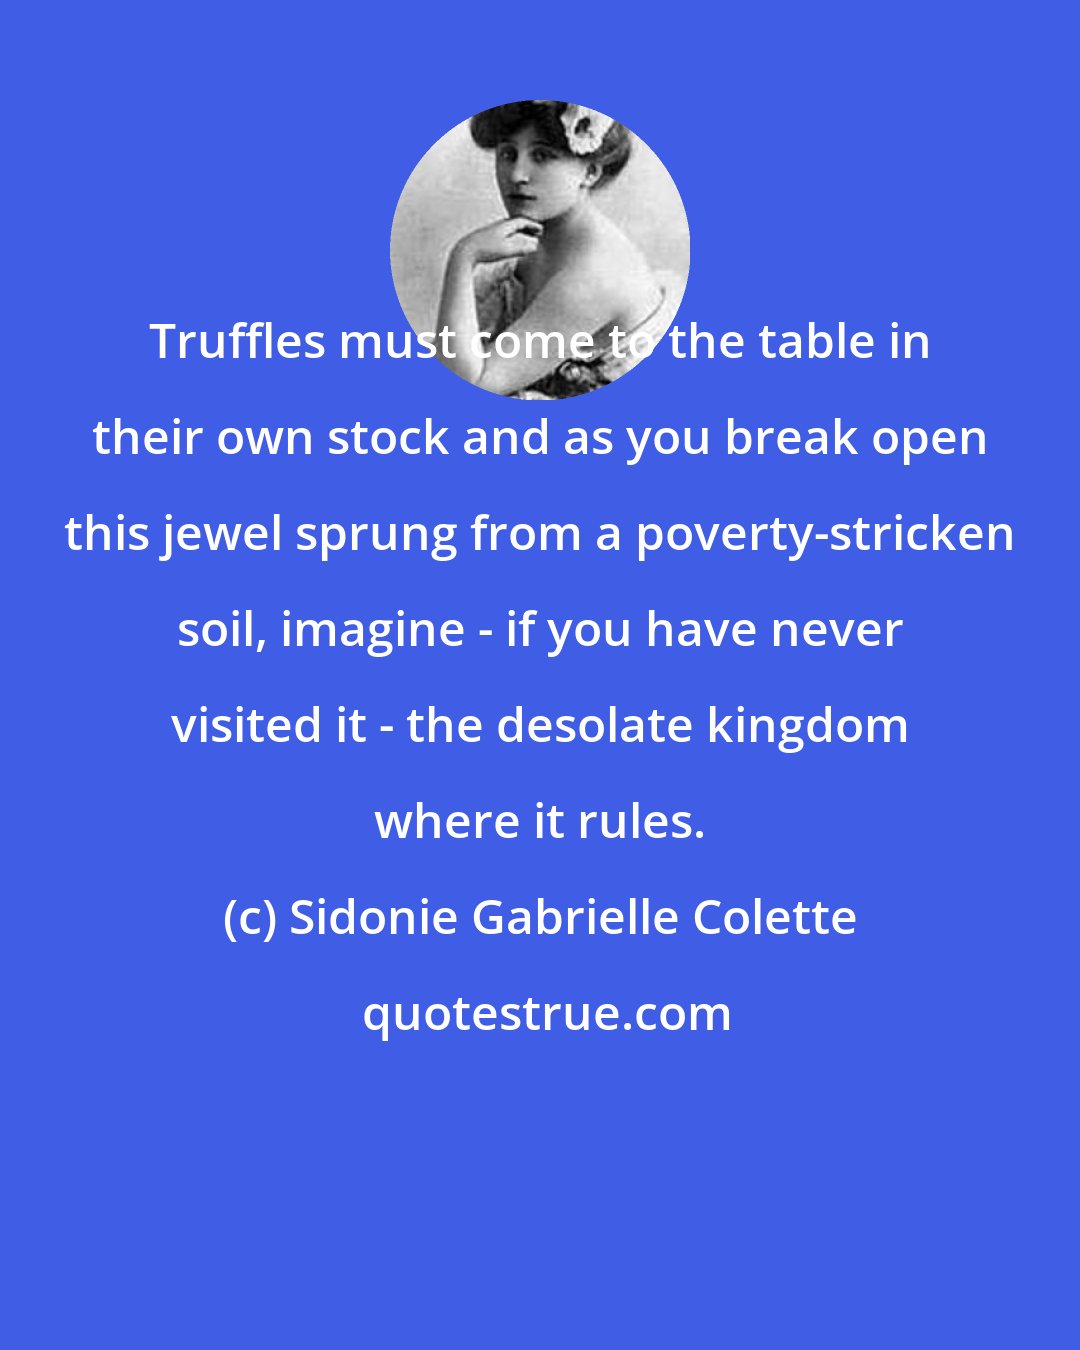 Sidonie Gabrielle Colette: Truffles must come to the table in their own stock and as you break open this jewel sprung from a poverty-stricken soil, imagine - if you have never visited it - the desolate kingdom where it rules.